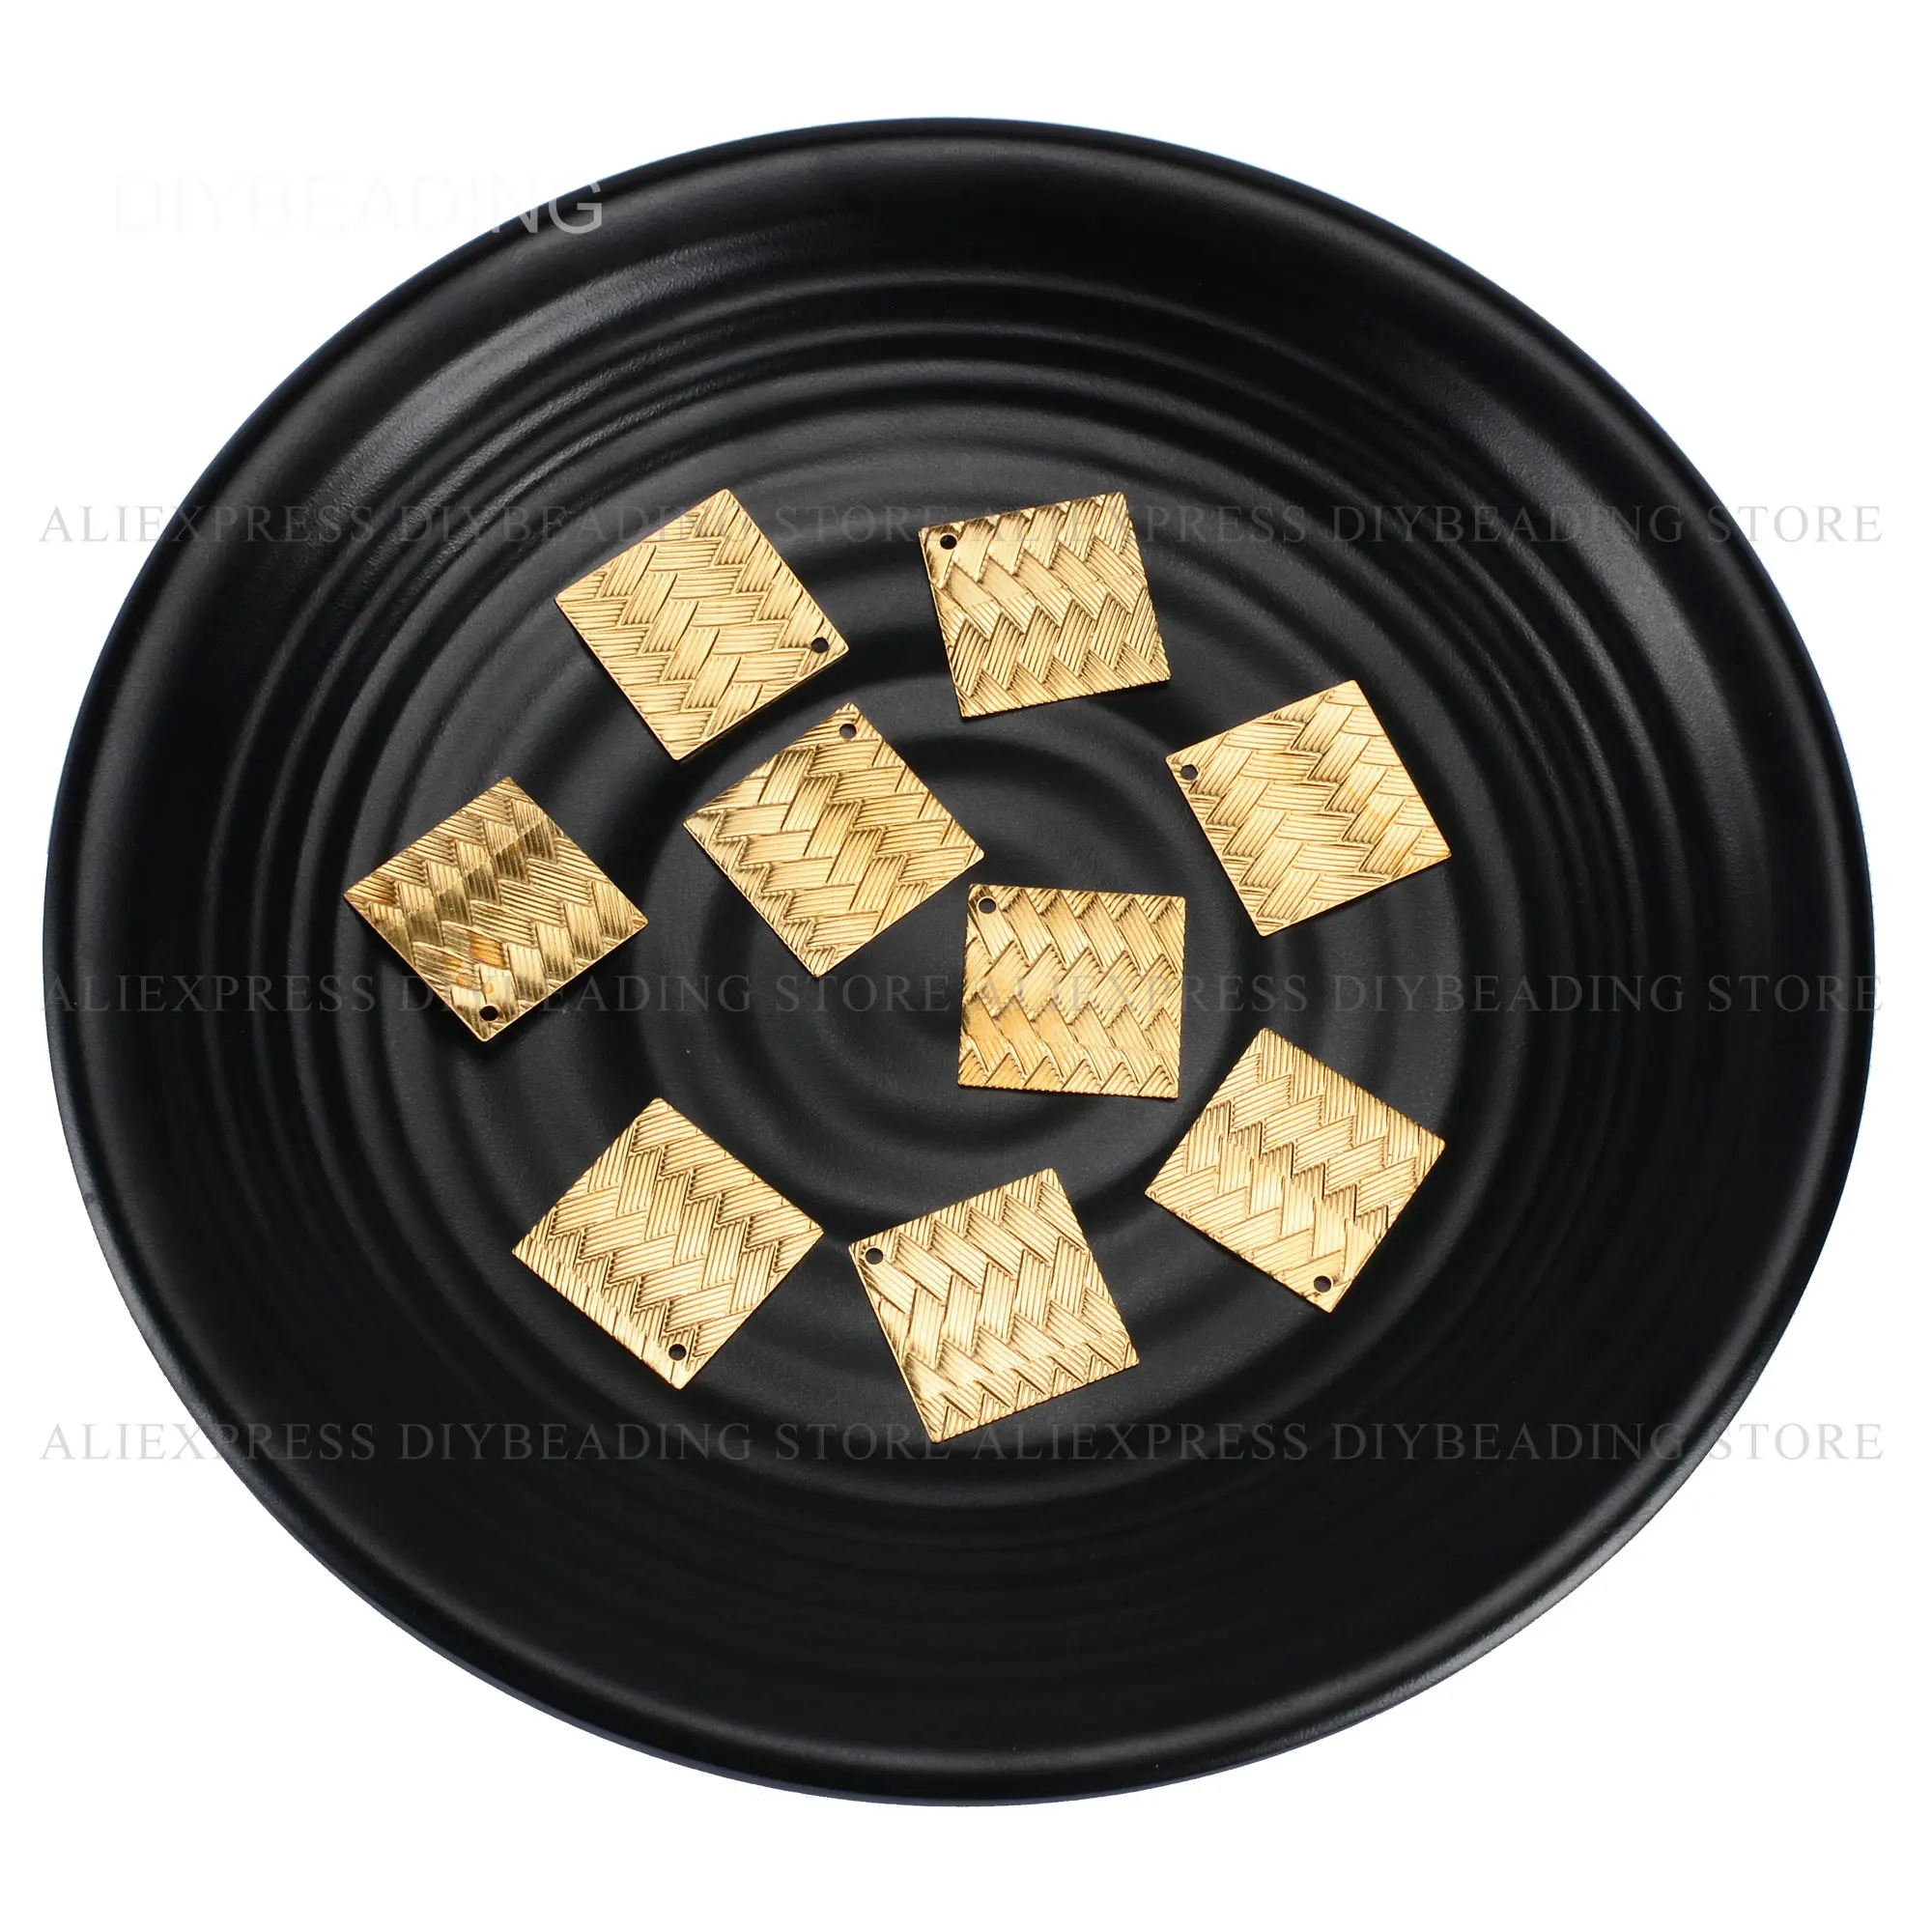 

20-1000 Pcs Brass Finding for Jewelry Making Double Side Textured Square Geometric Charm Pendant Component Bulk Wholesale (18mm)